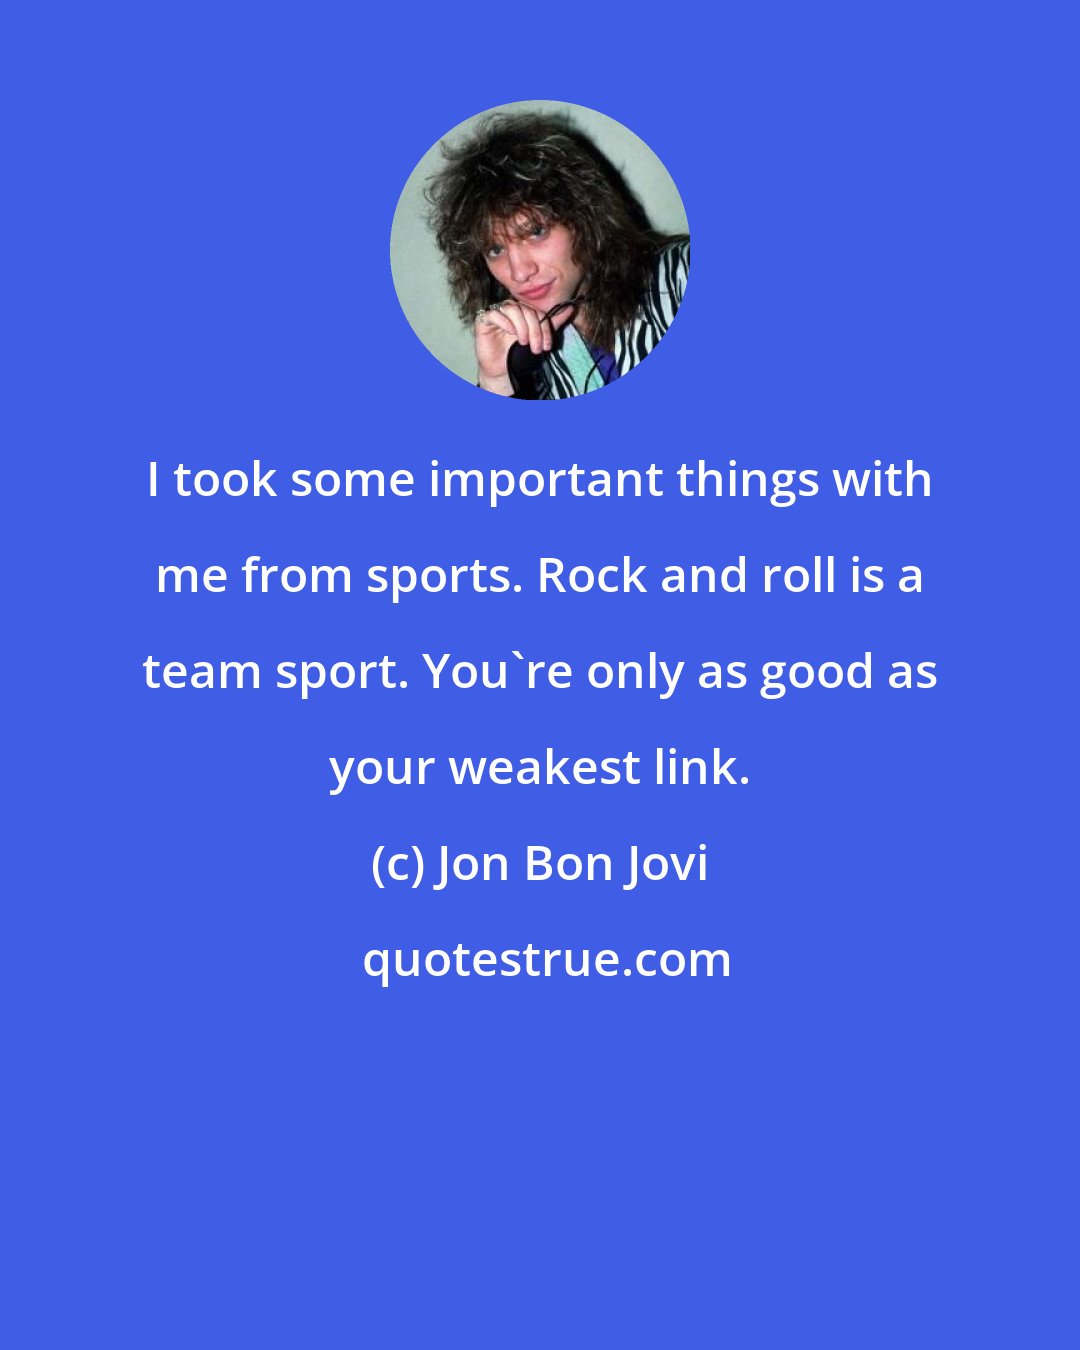 Jon Bon Jovi: I took some important things with me from sports. Rock and roll is a team sport. You're only as good as your weakest link.